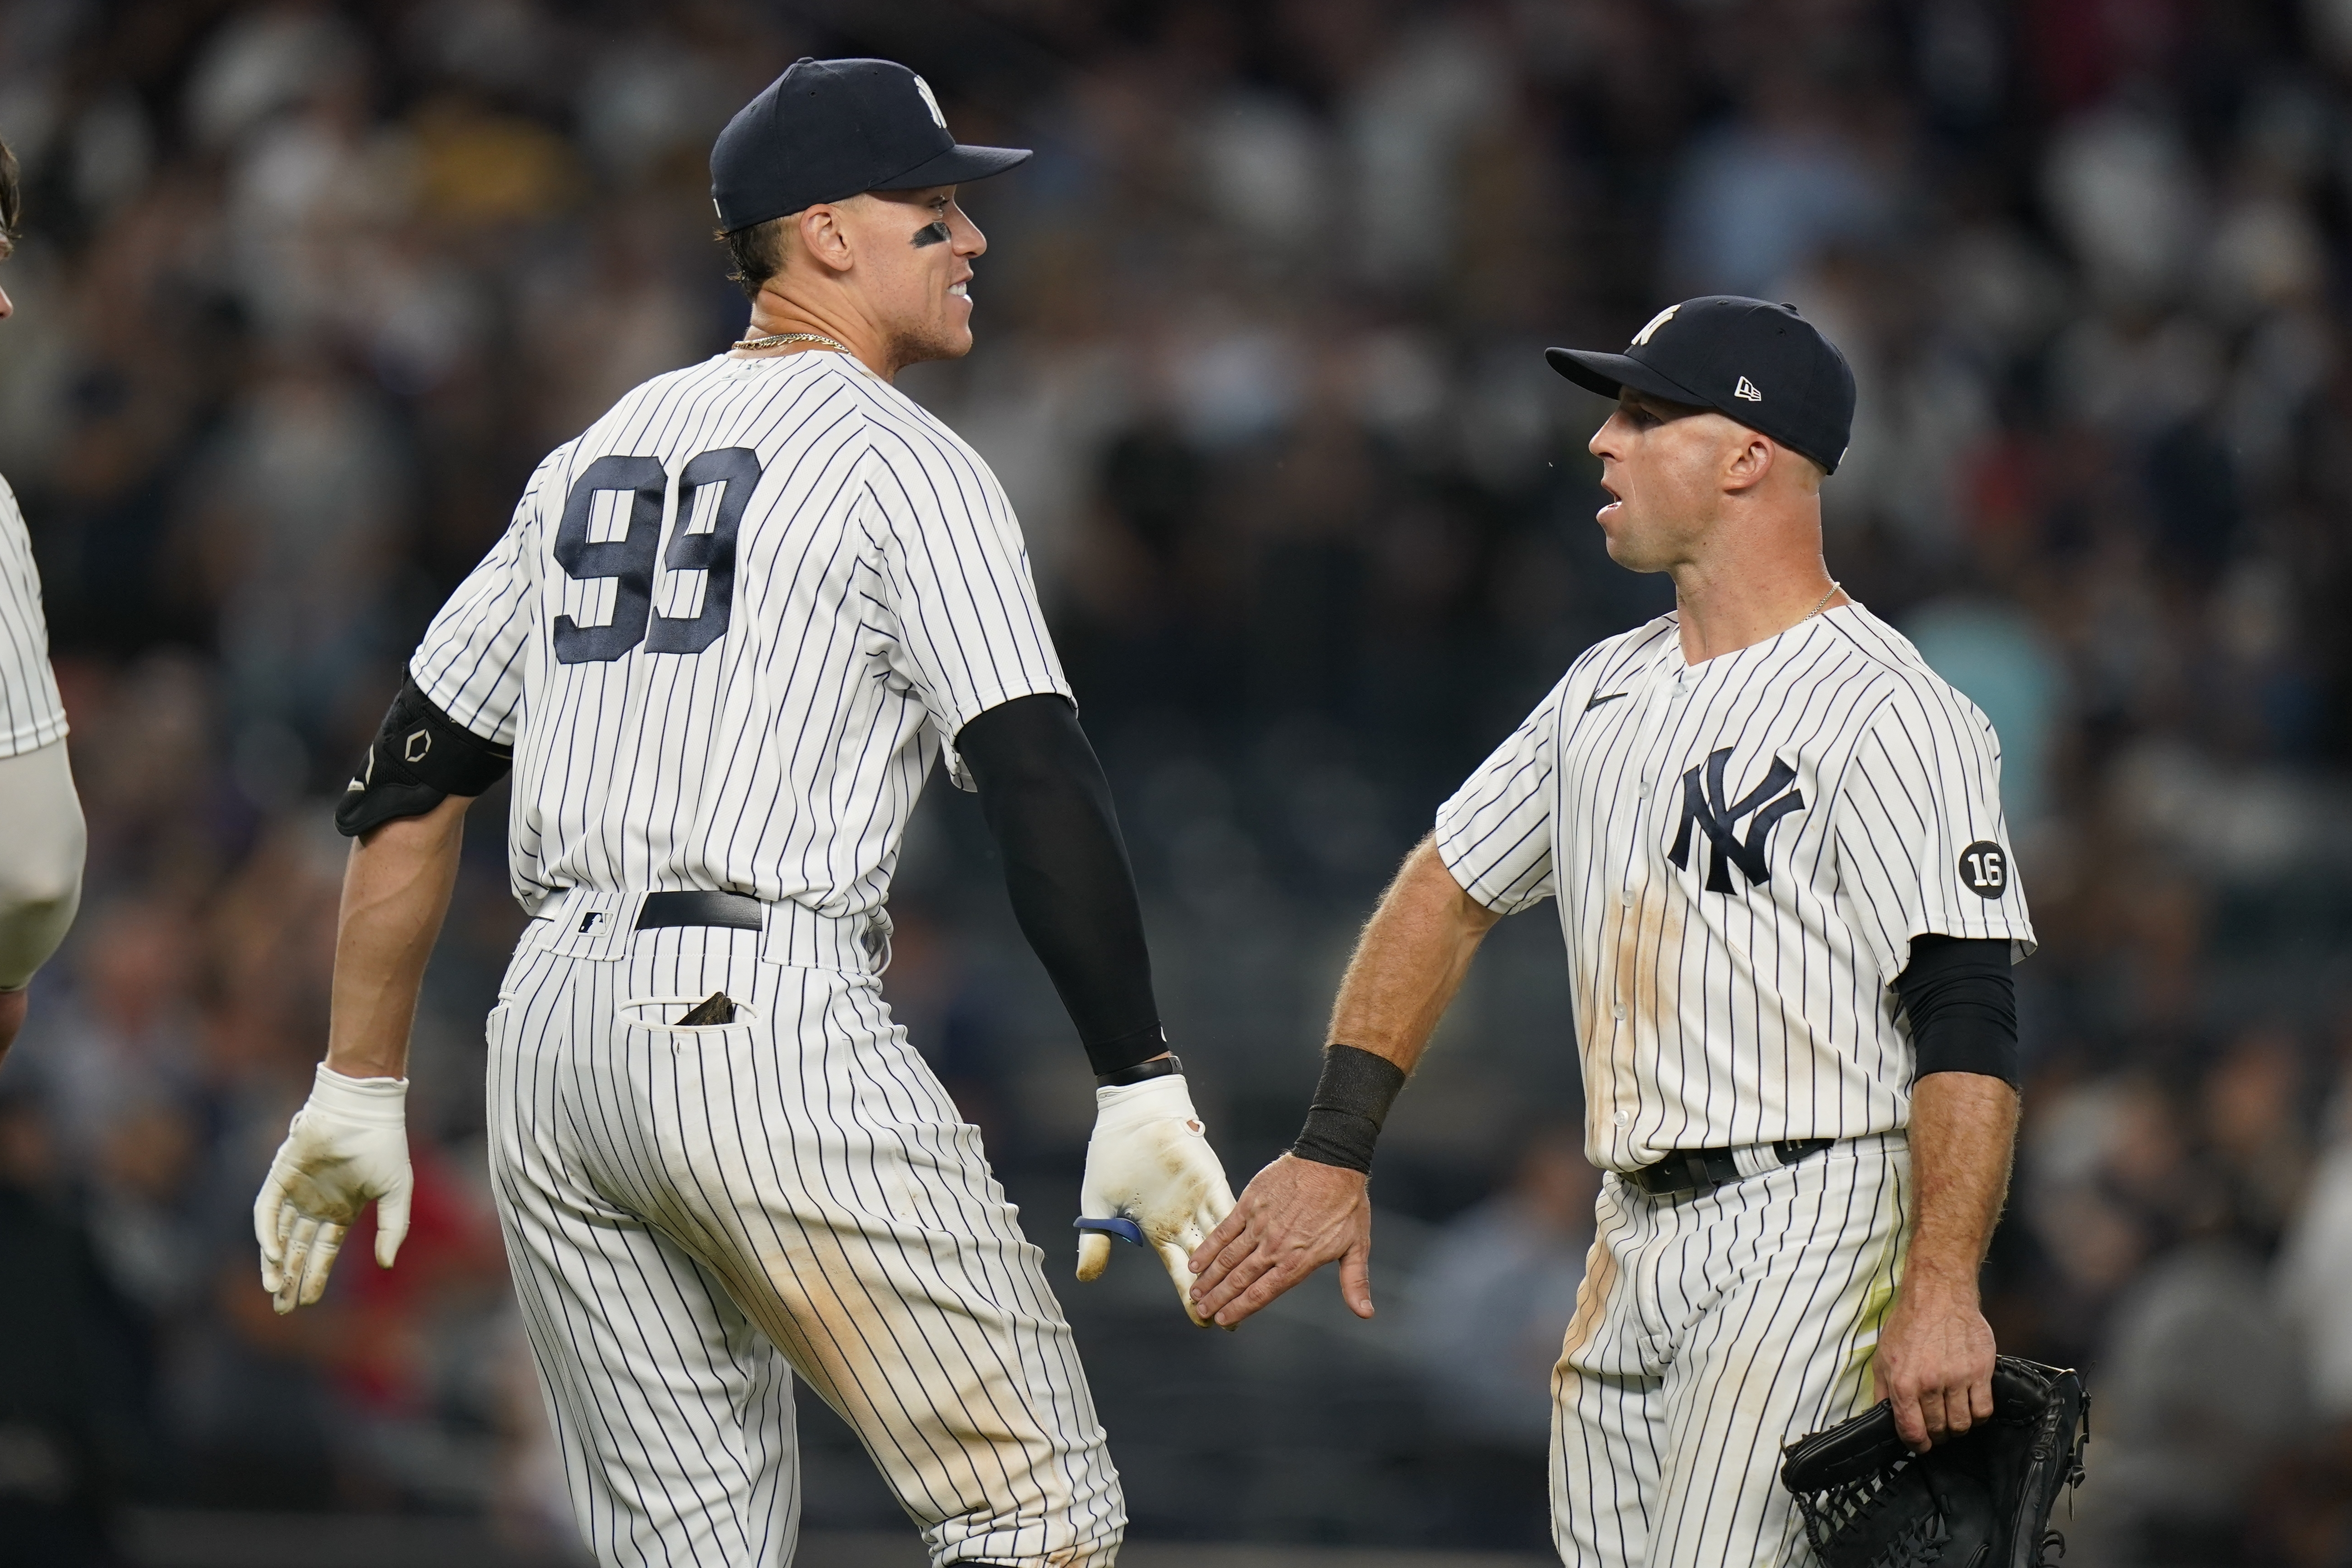 Brett Gardner is not here for your fun and games on Players Weekend 